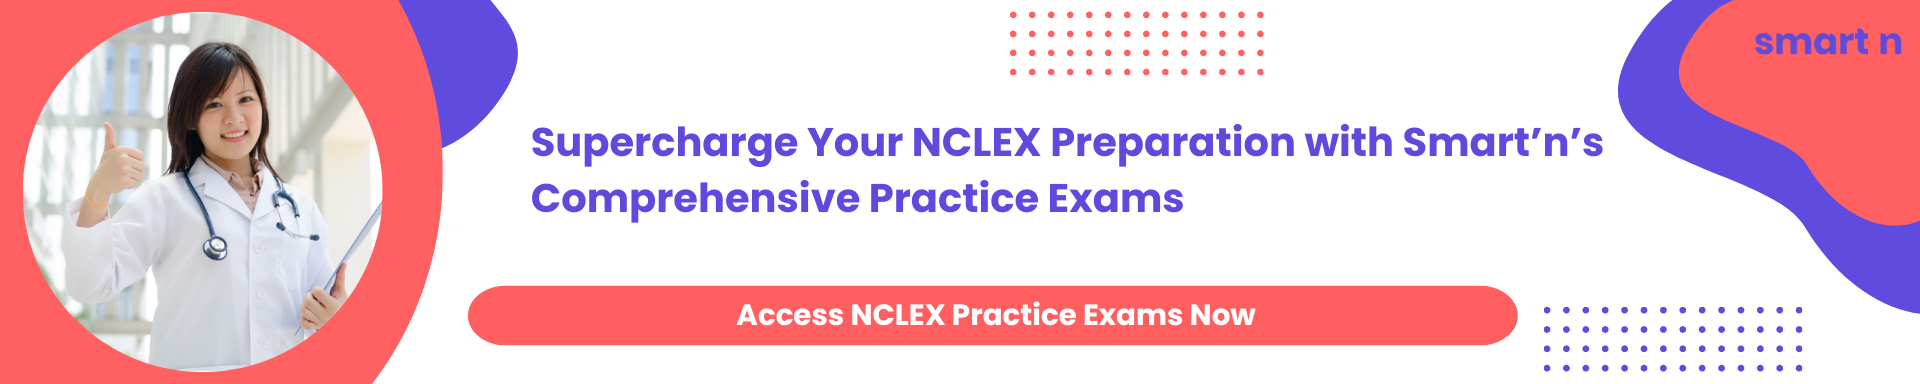 Supercharge Your NCLEX Preparation with Smart’n’s Comprehensive Practice Exams